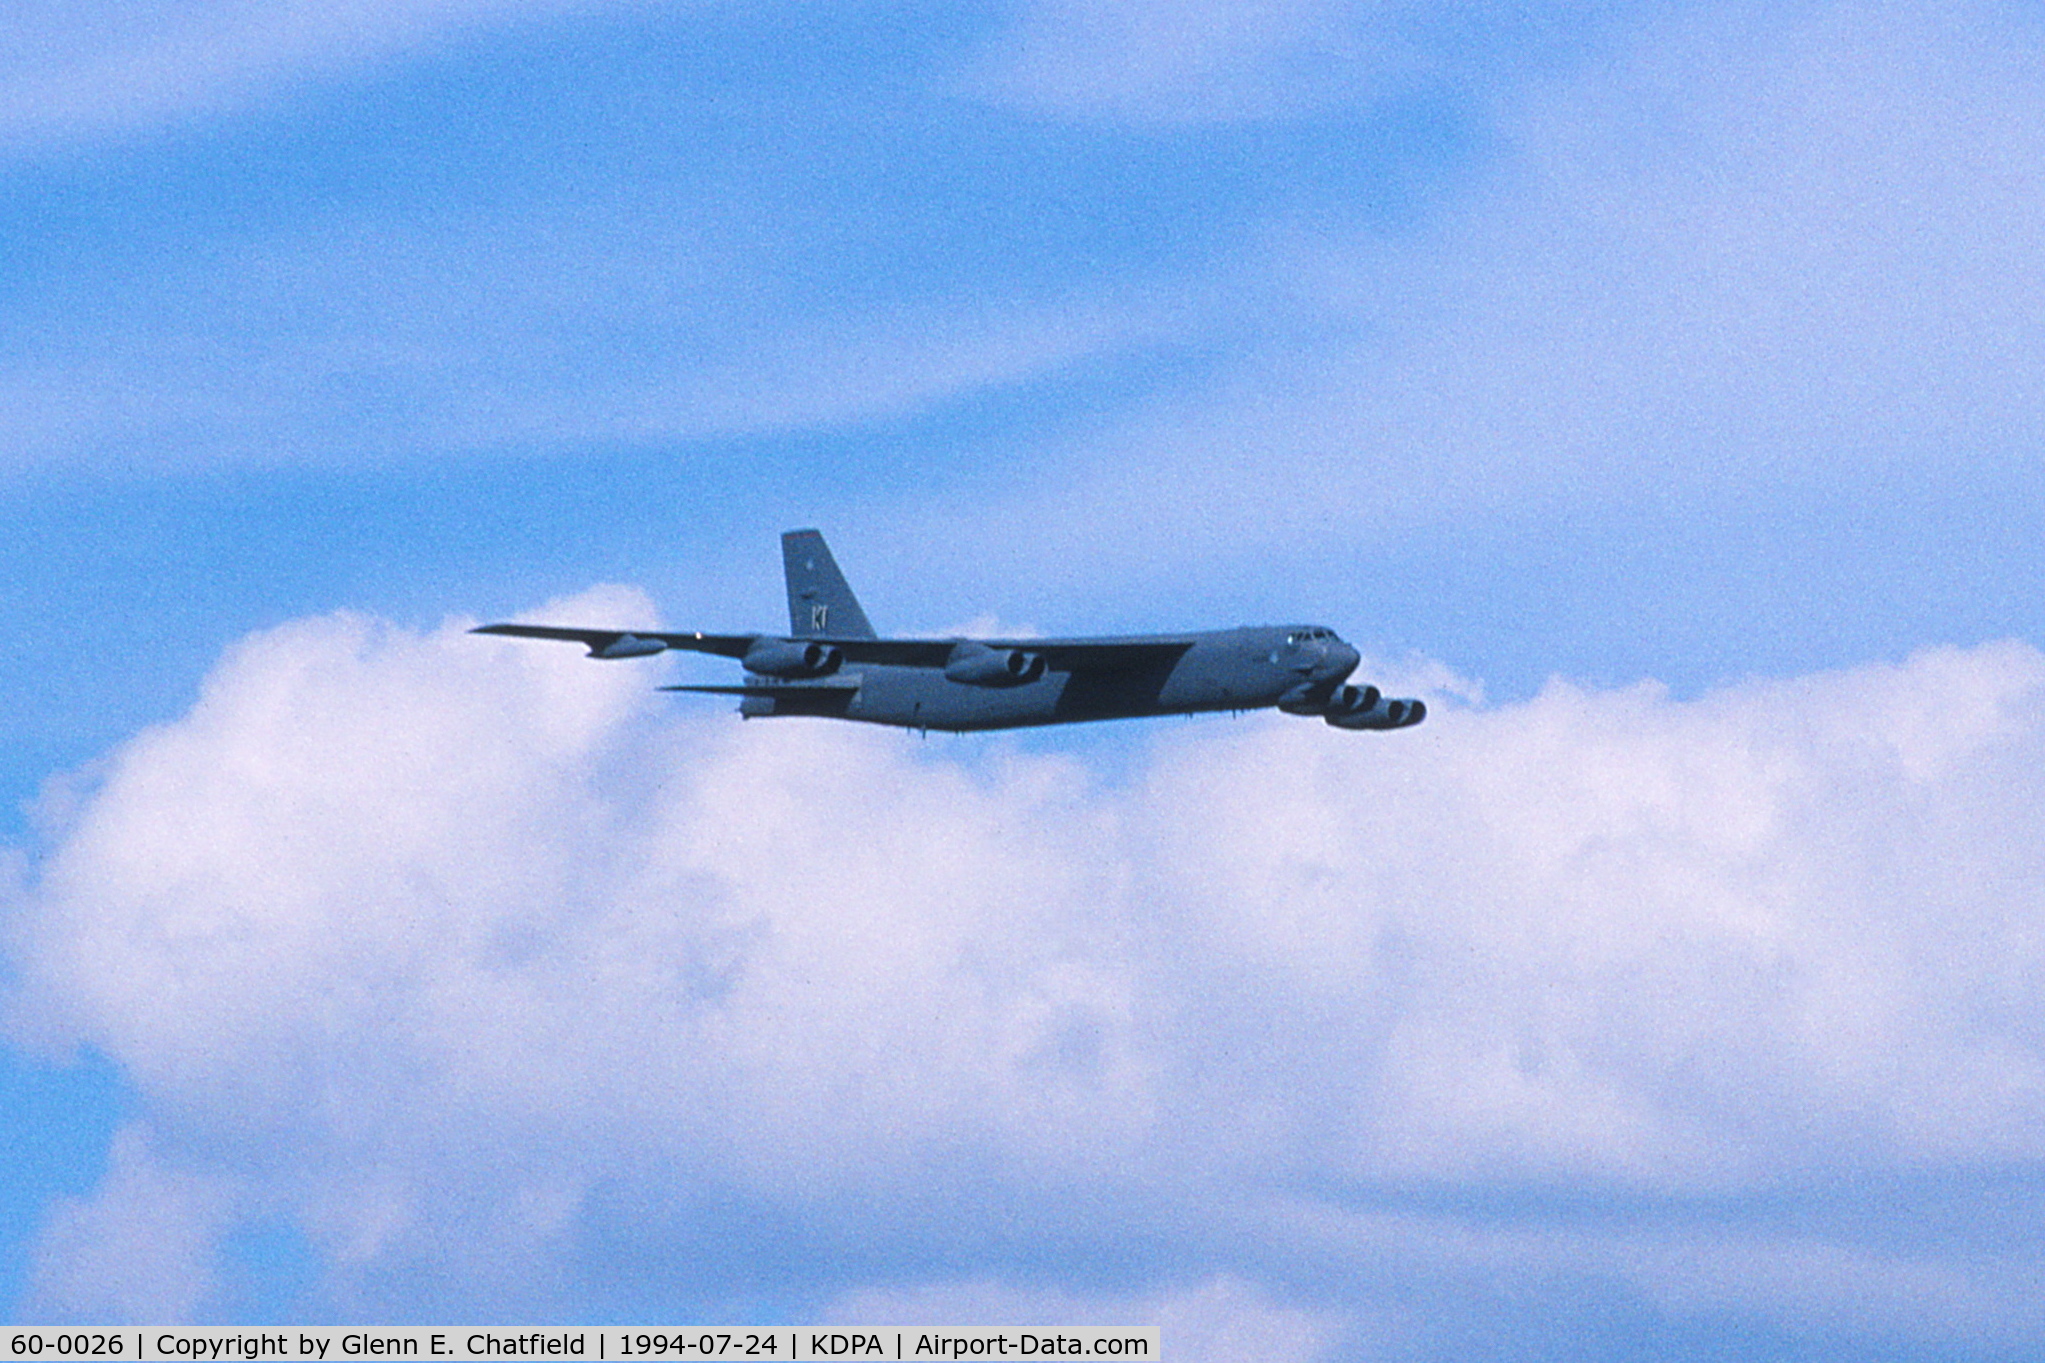 60-0026, 1960 Boeing B-52H Stratofortress C/N 464391, B-52H over flying air show line